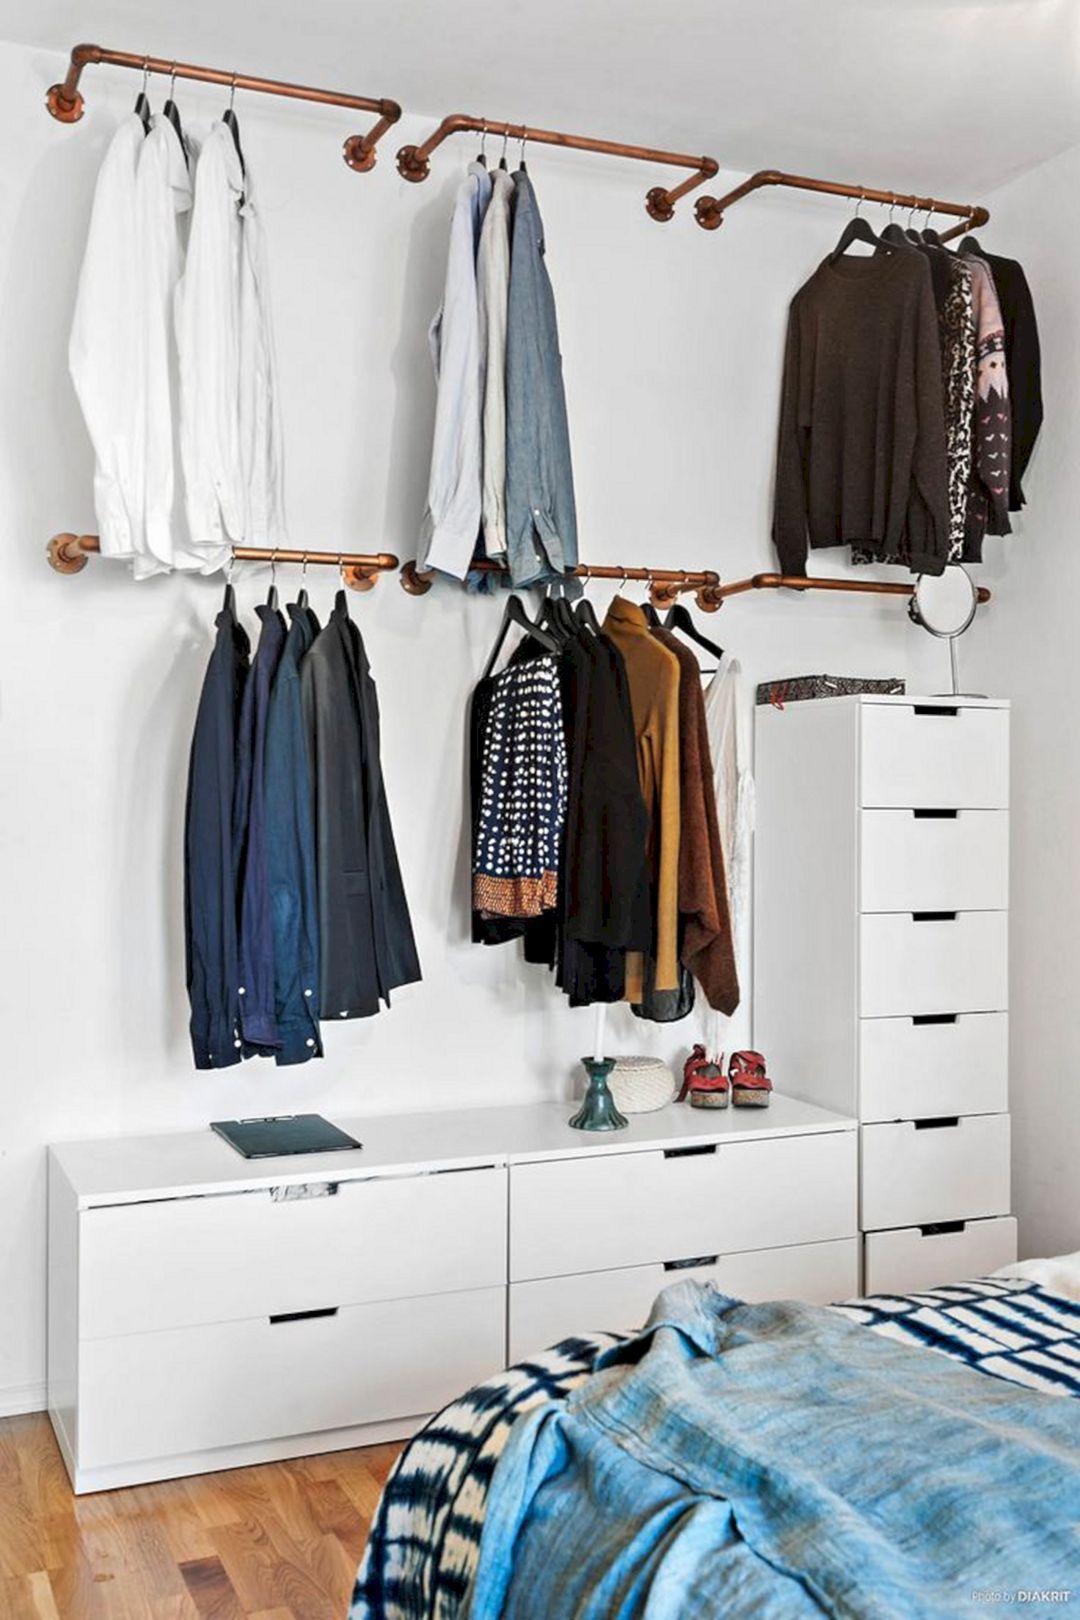 Having you all time diy bedroom clothing
storage ideas